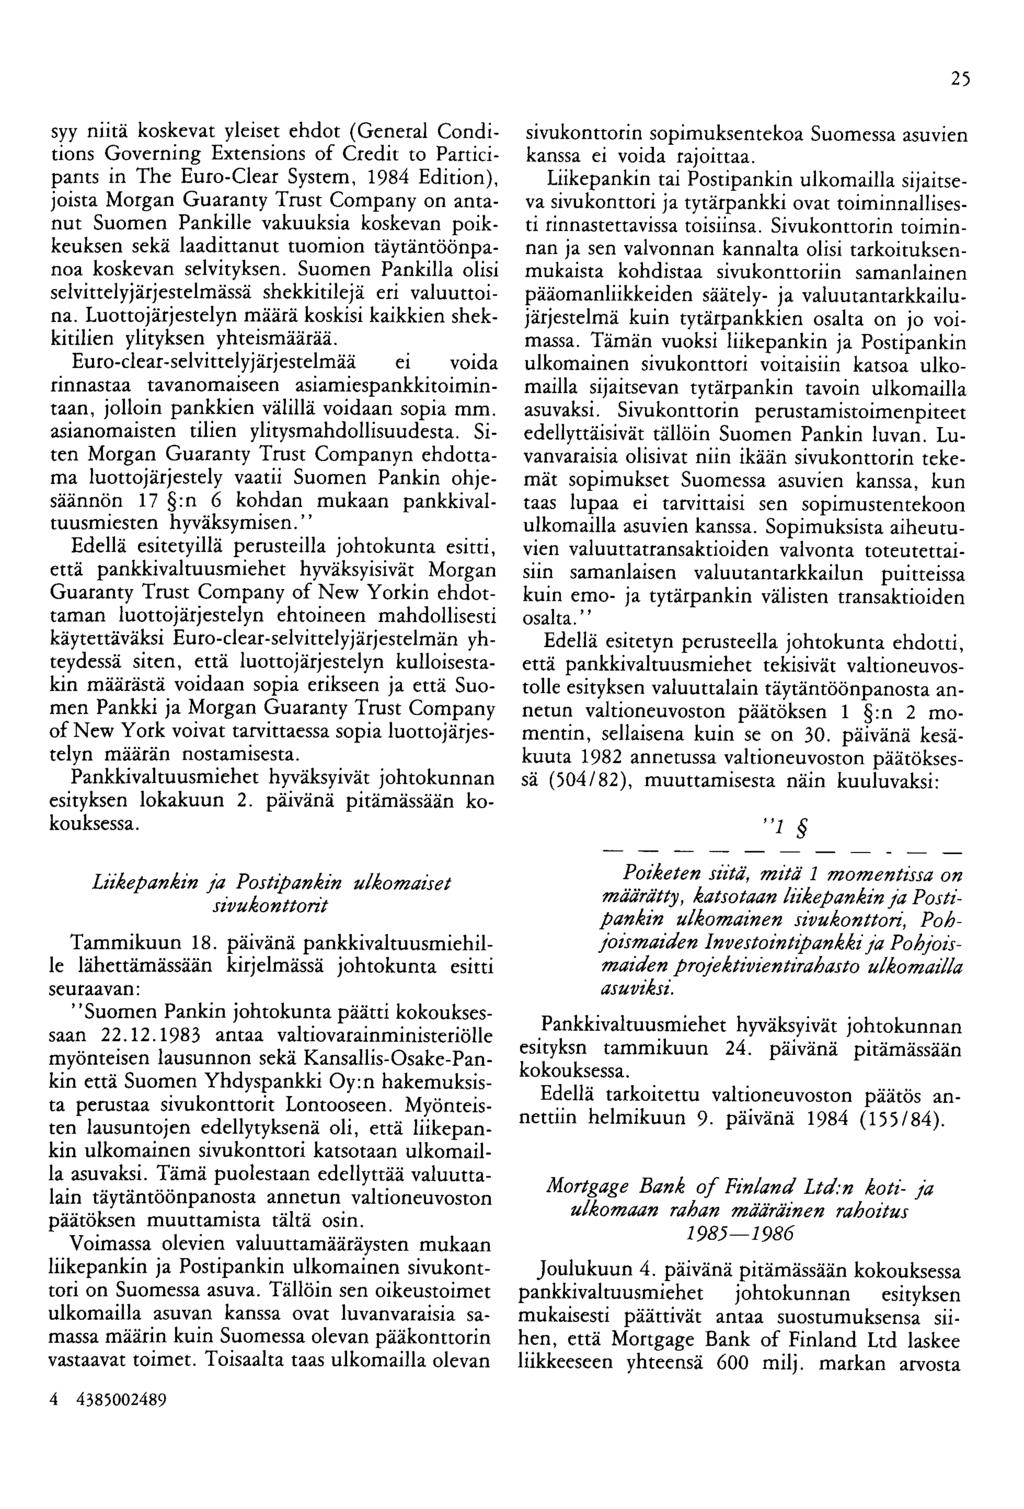 25 syy niitä koskevat yleiset ehdot (General Conditions Governing Extensions of Credit to Participants in The Euro-Clear System, 1984 Edition), joista Morgan Guaranty Trust Company on antanut Suomen